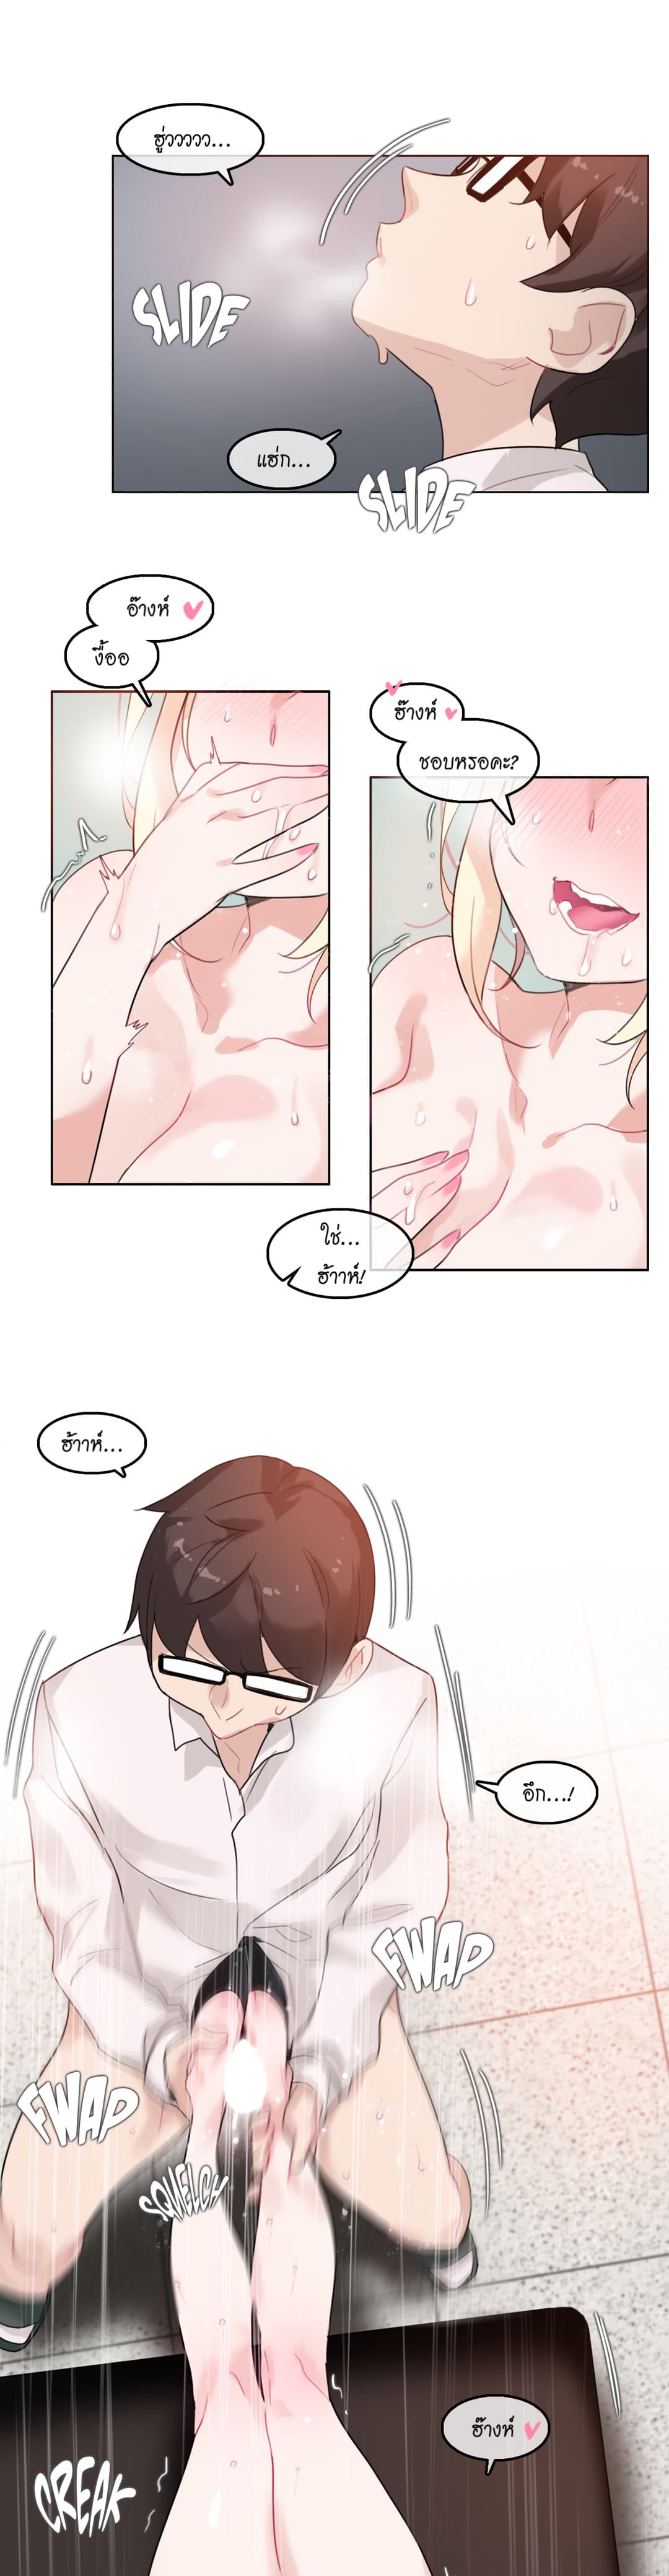 A Pervert’s Daily Life 33 (7)